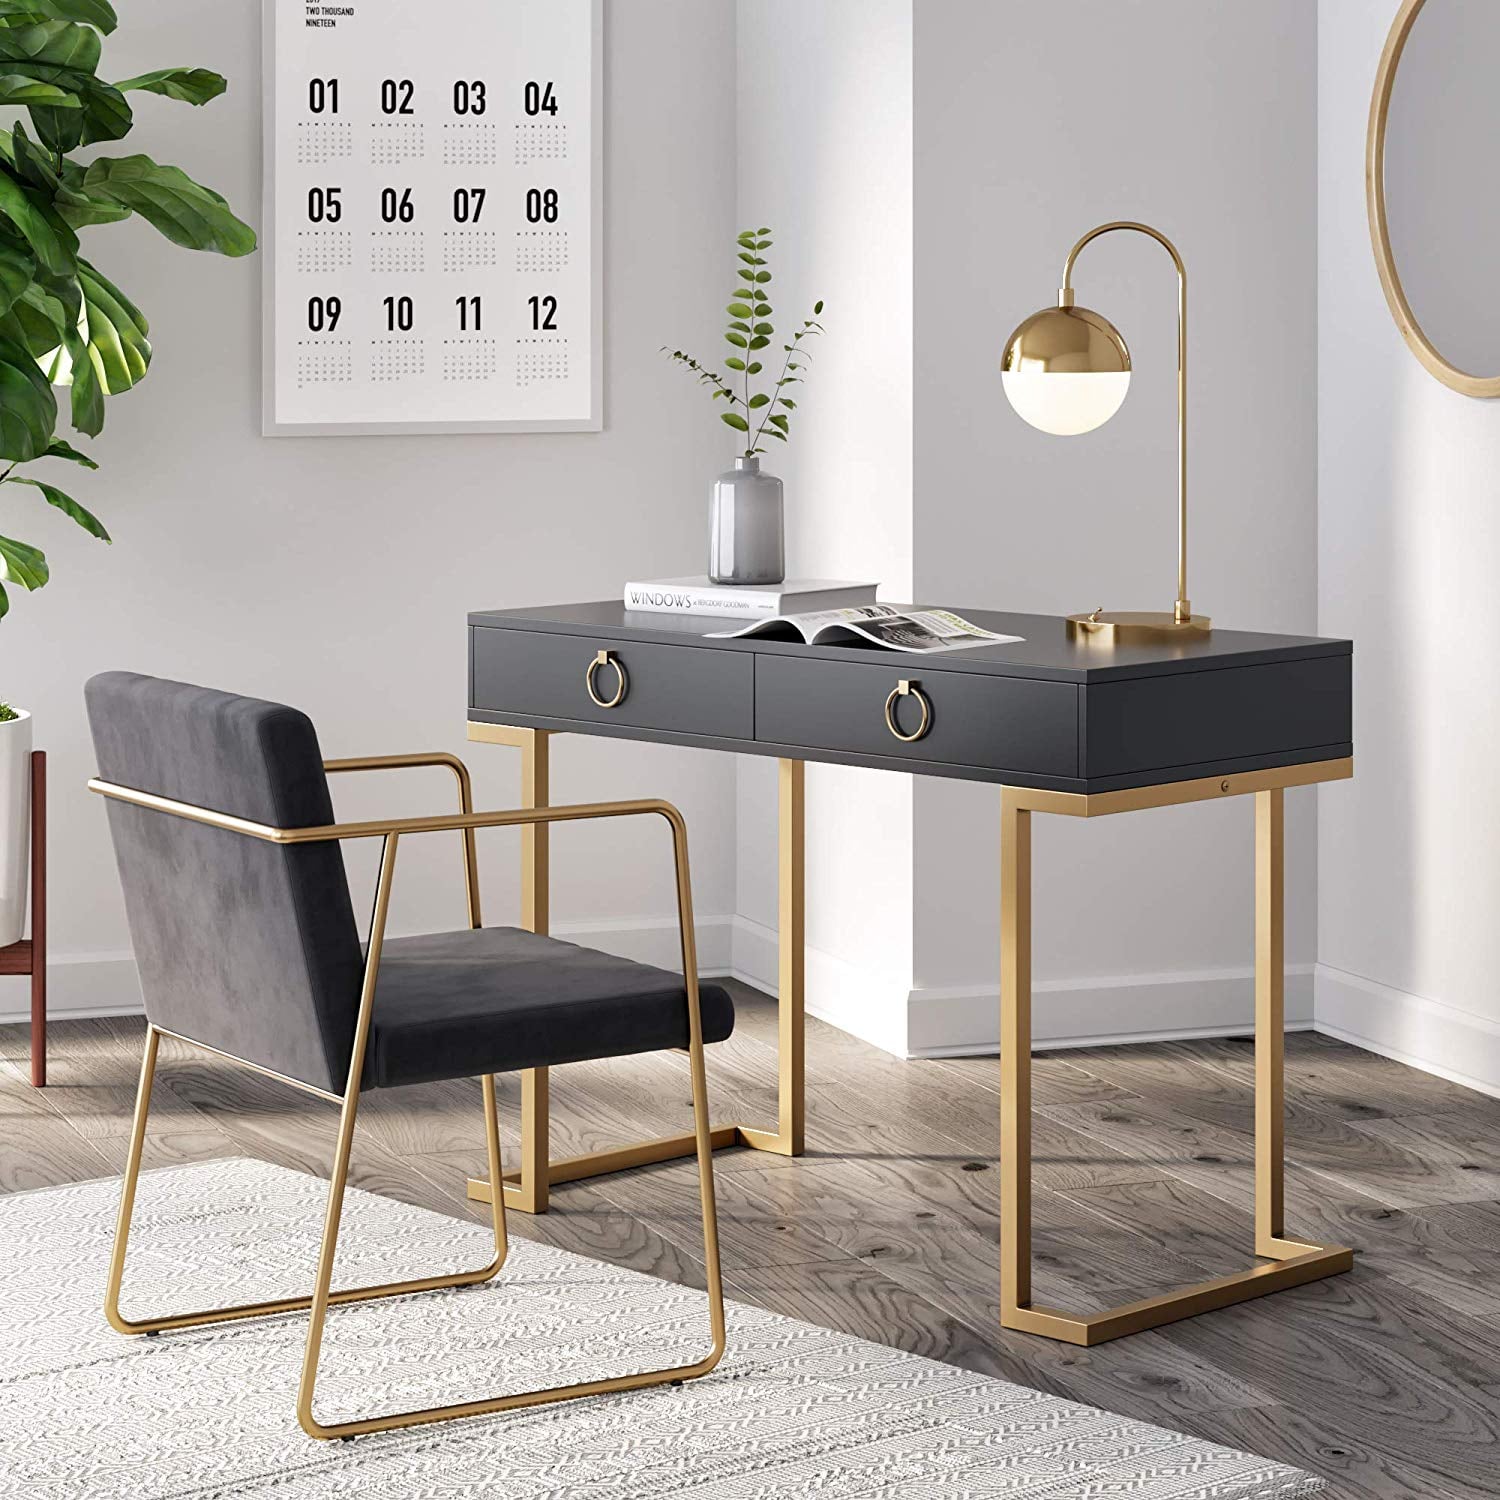 Stylish and Affordable Space-Saving Desks From Amazon 2022 | POPSUGAR Home